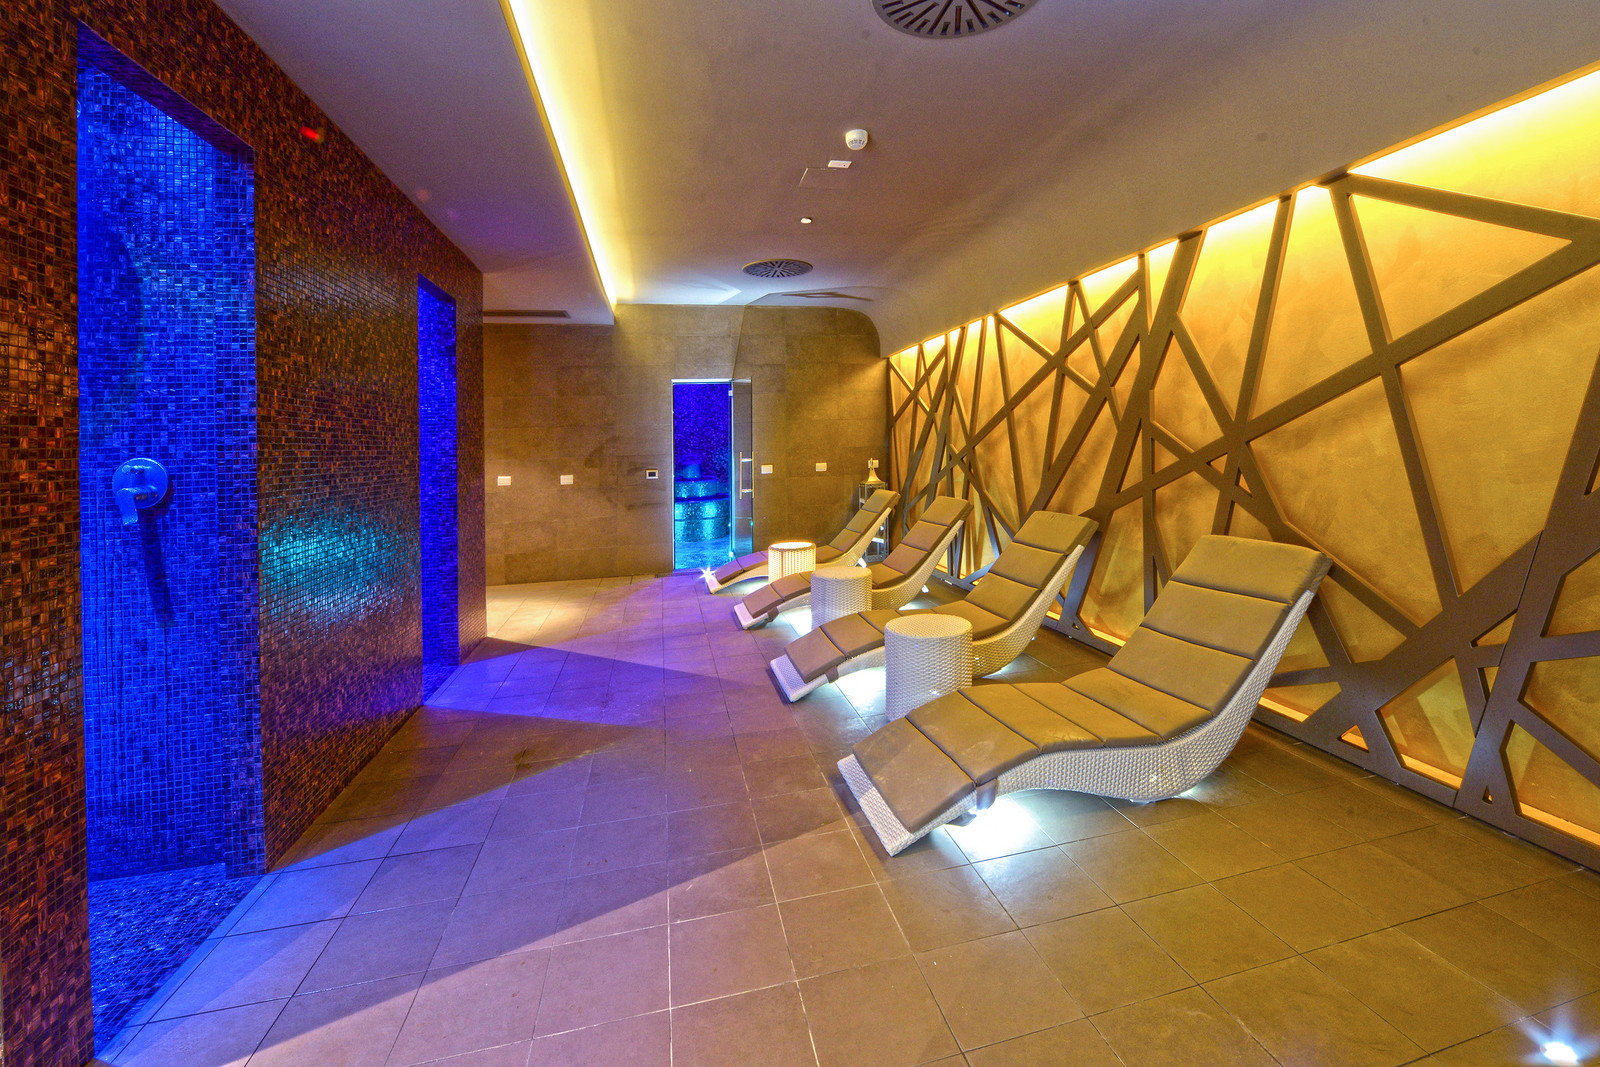 Spa relaxing area